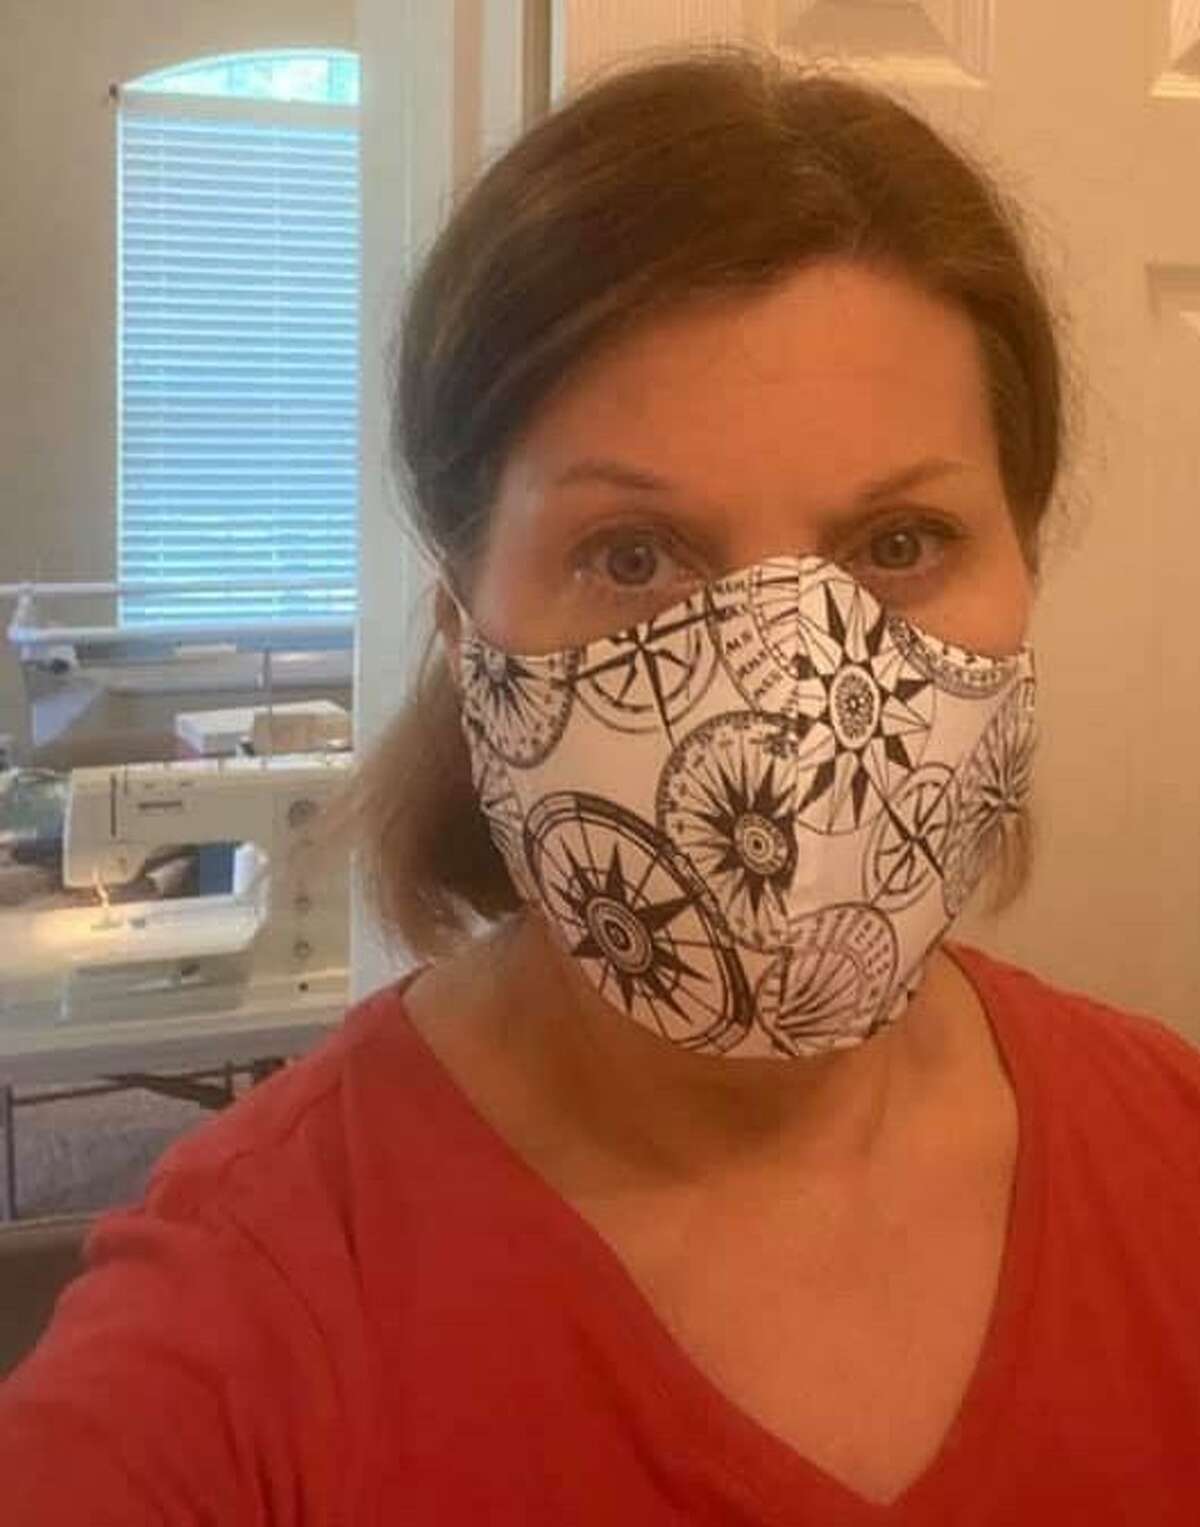 Gena Reyna, who lives in Conroe's Graystone Hills, has used her sewing talents to make masks for the seniors and those vulnerable in her community.